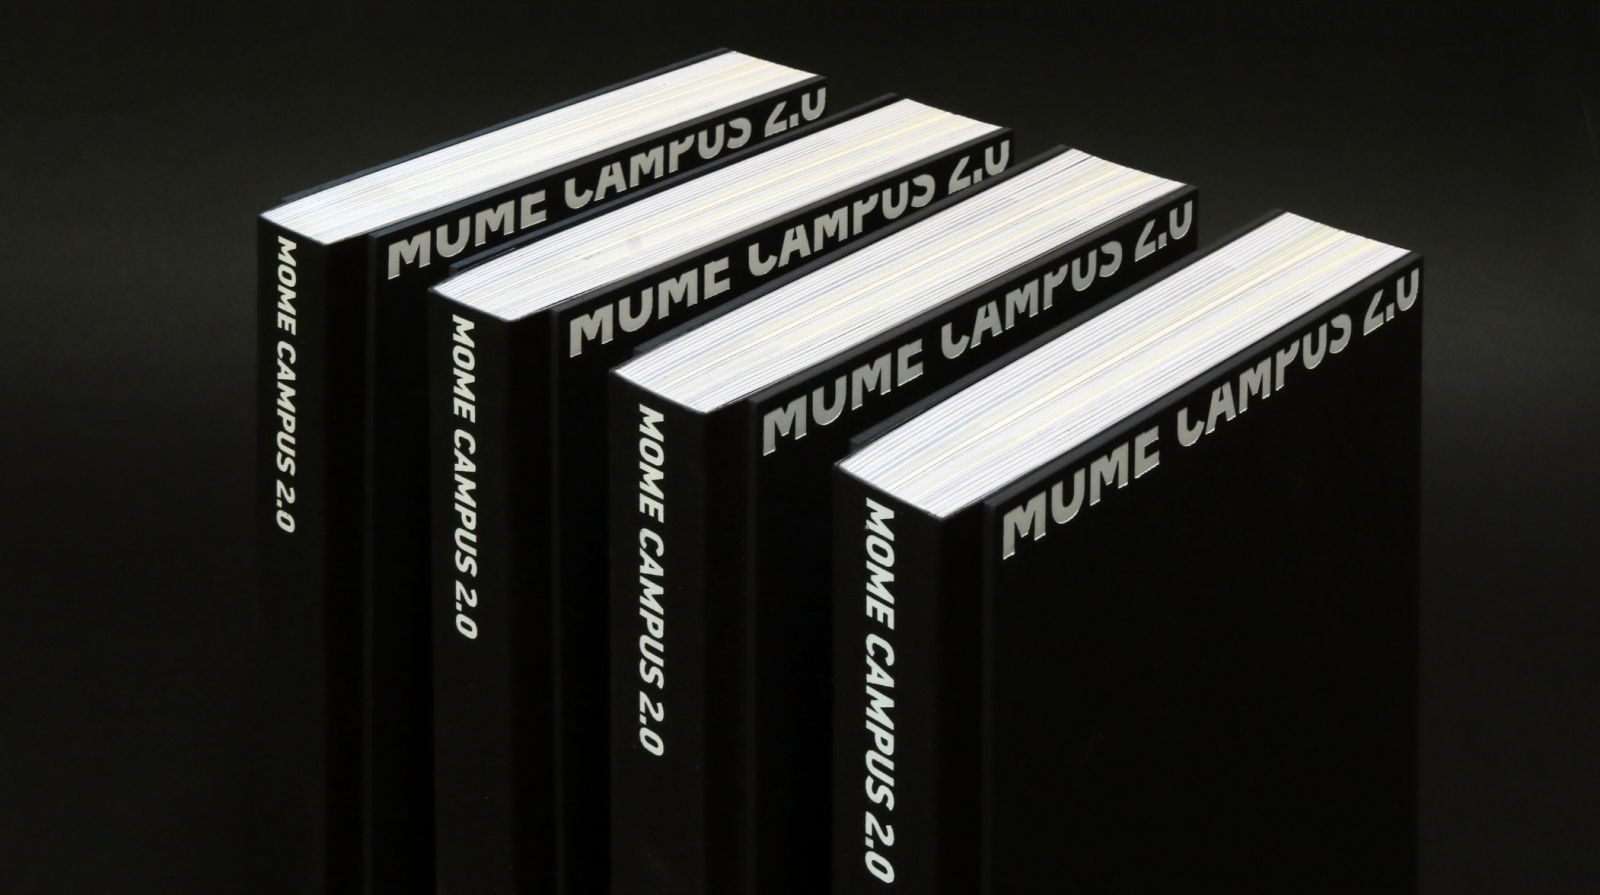 Mome Campus 2.0 Creates Contrast With Various Design Papers